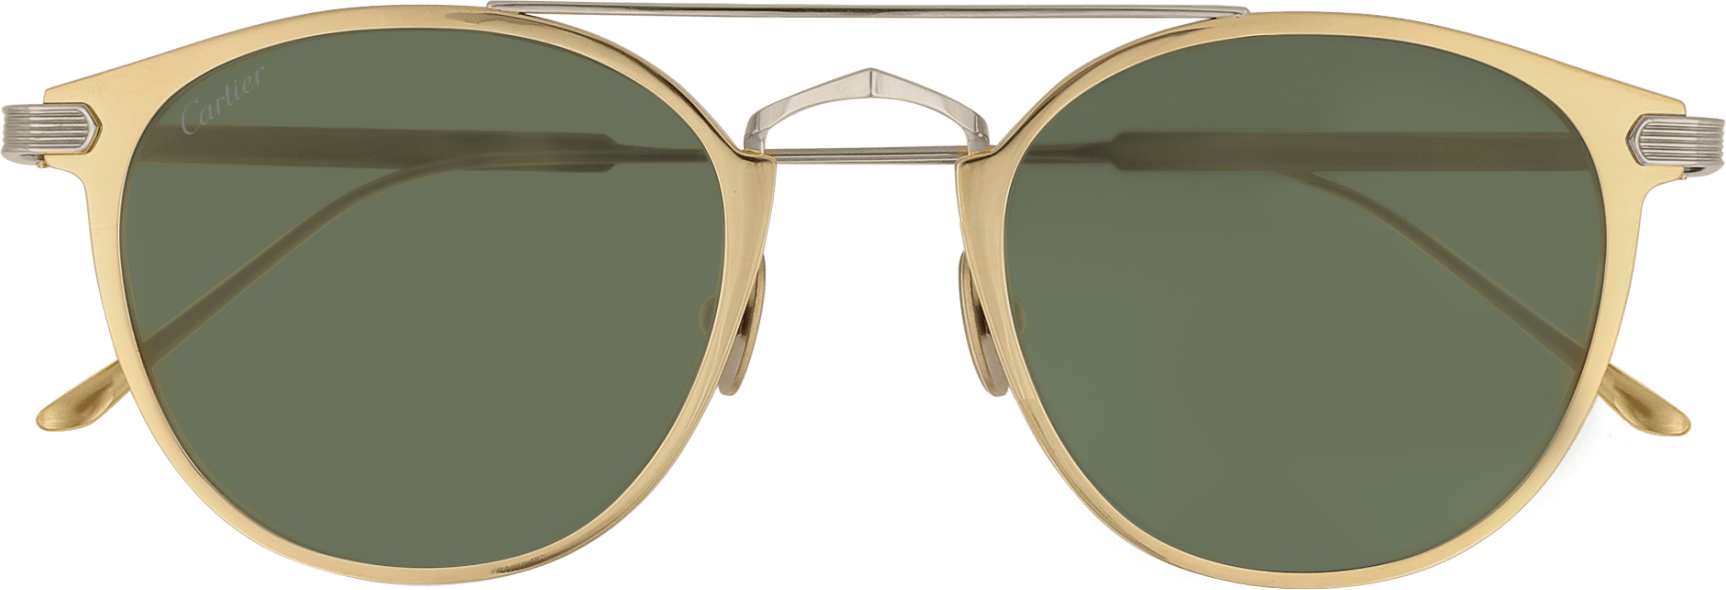 Color_CT0015S-002 - GOLD - GREEN - AR (ANTI REFLECTIVE) - POLARIZED